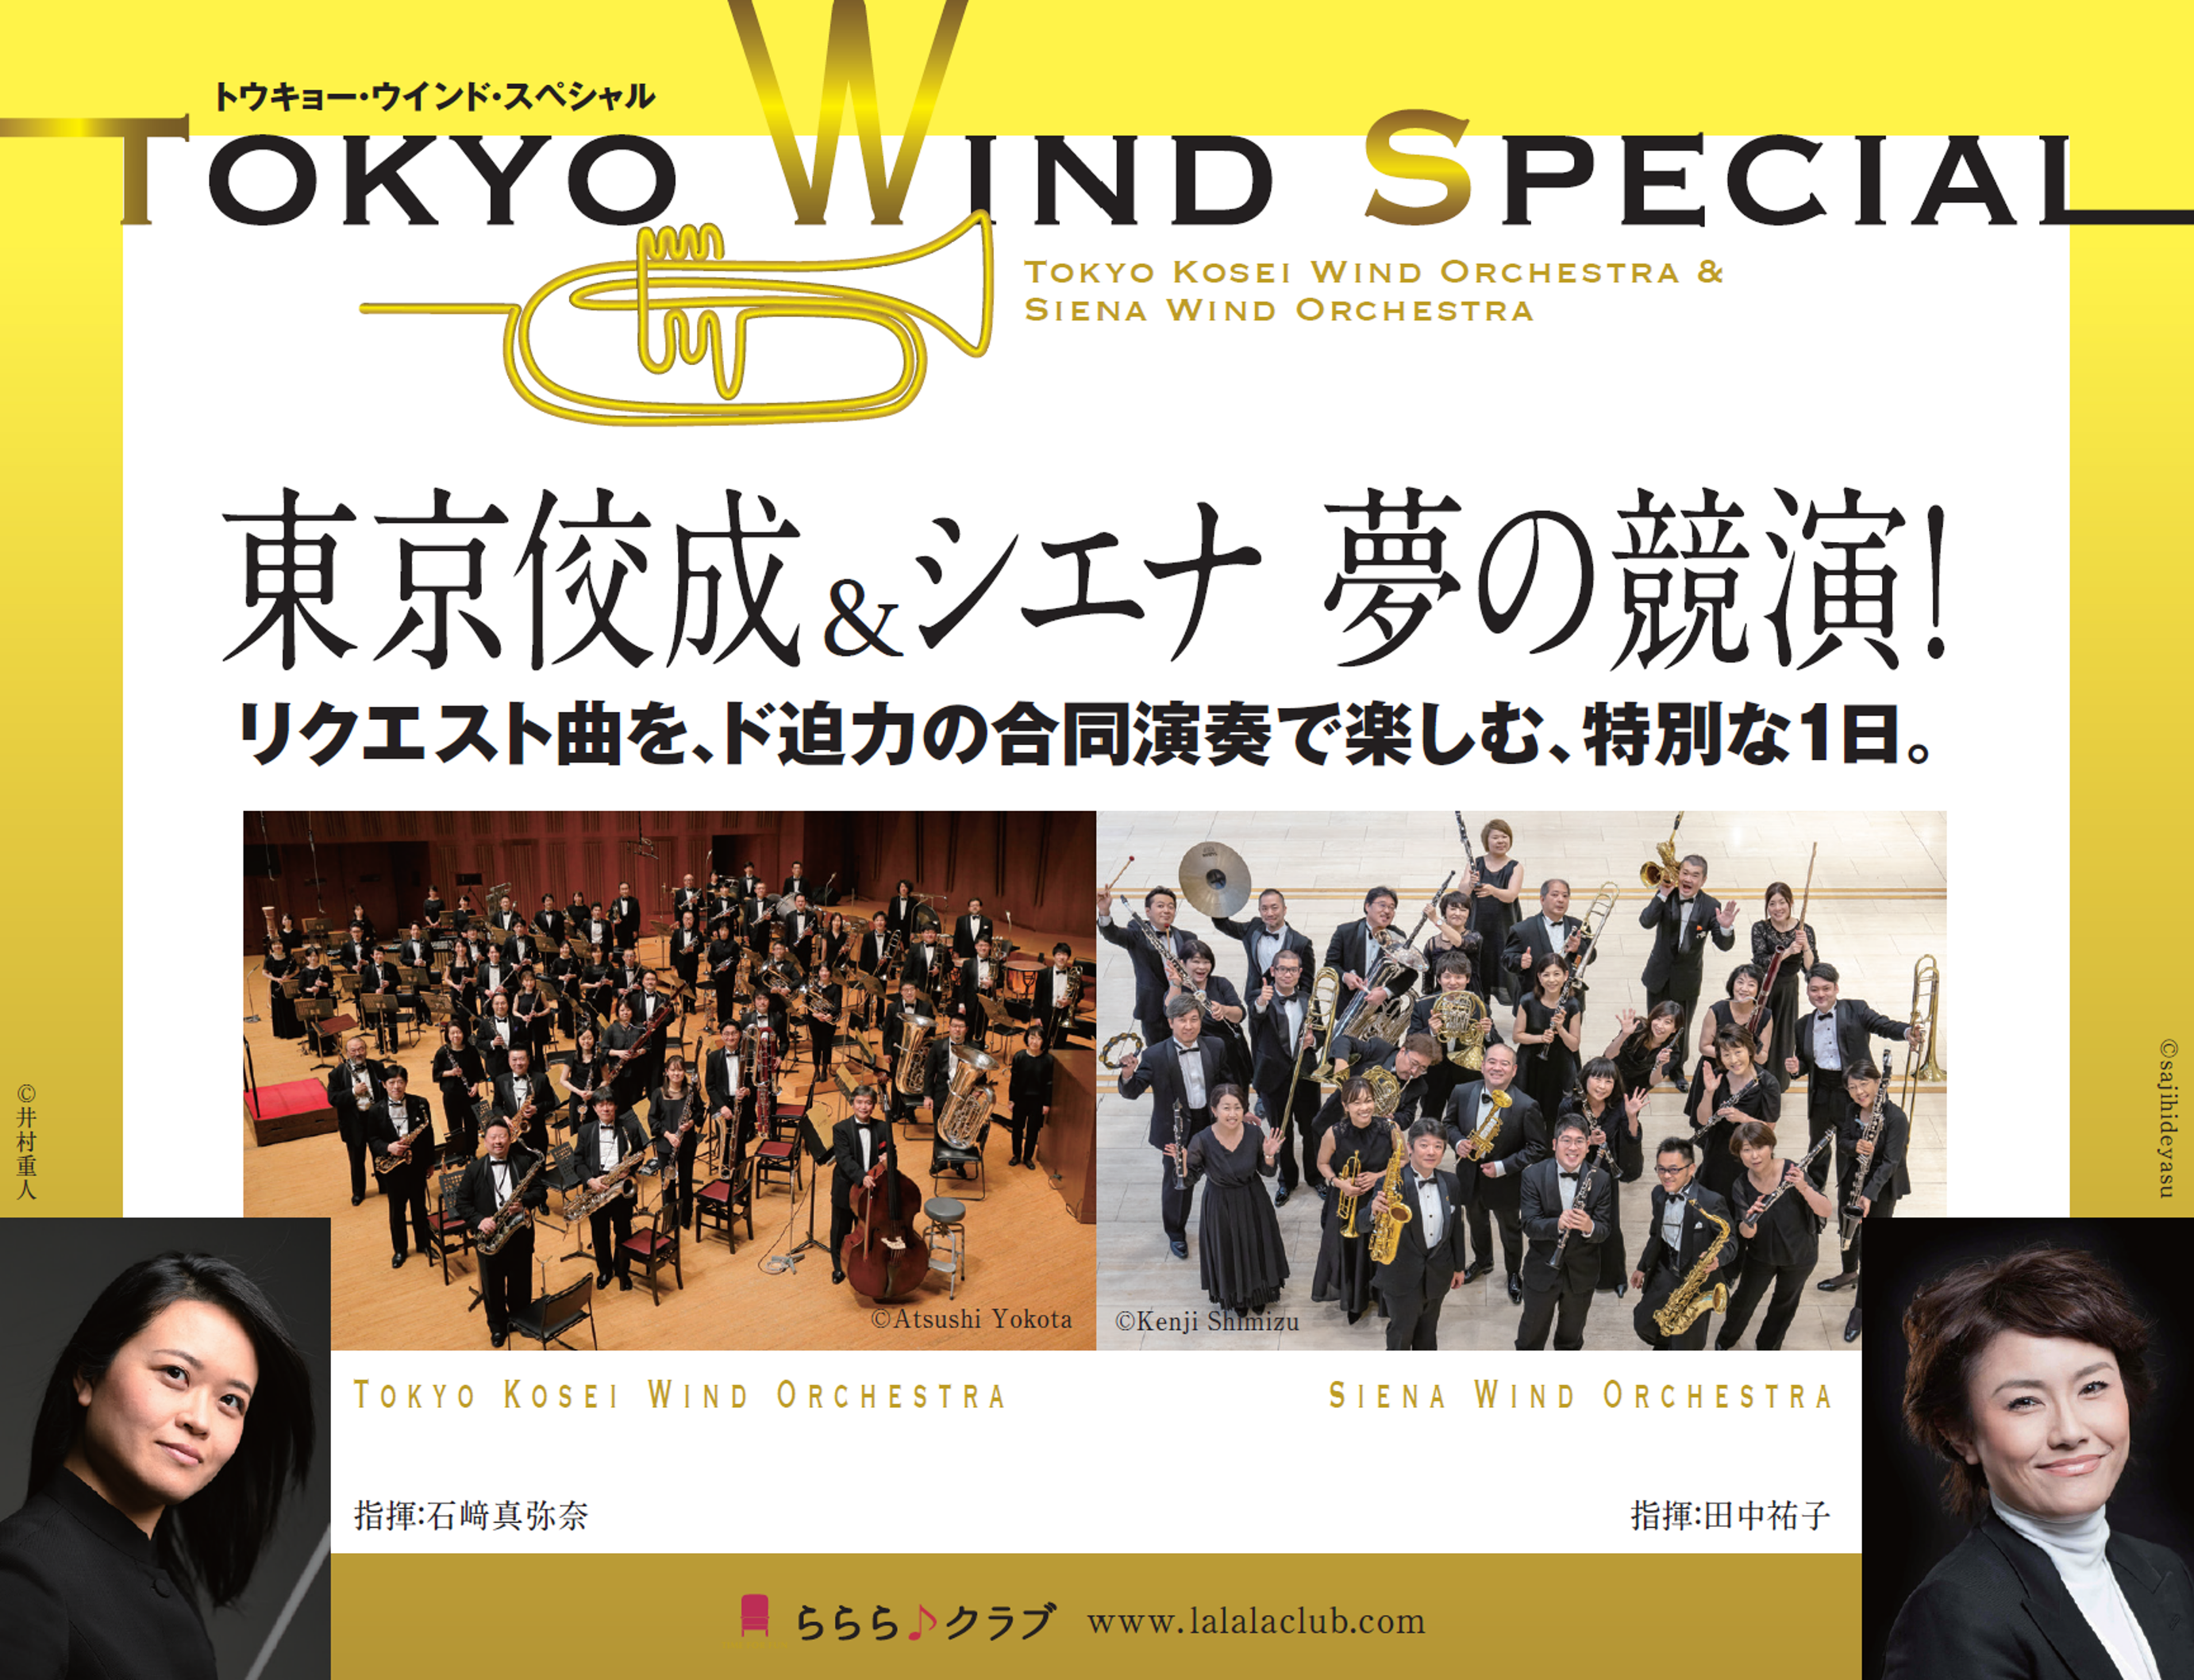 TOKYO WIND SPECIAL 東京佼成&シエナ 夢の競演！